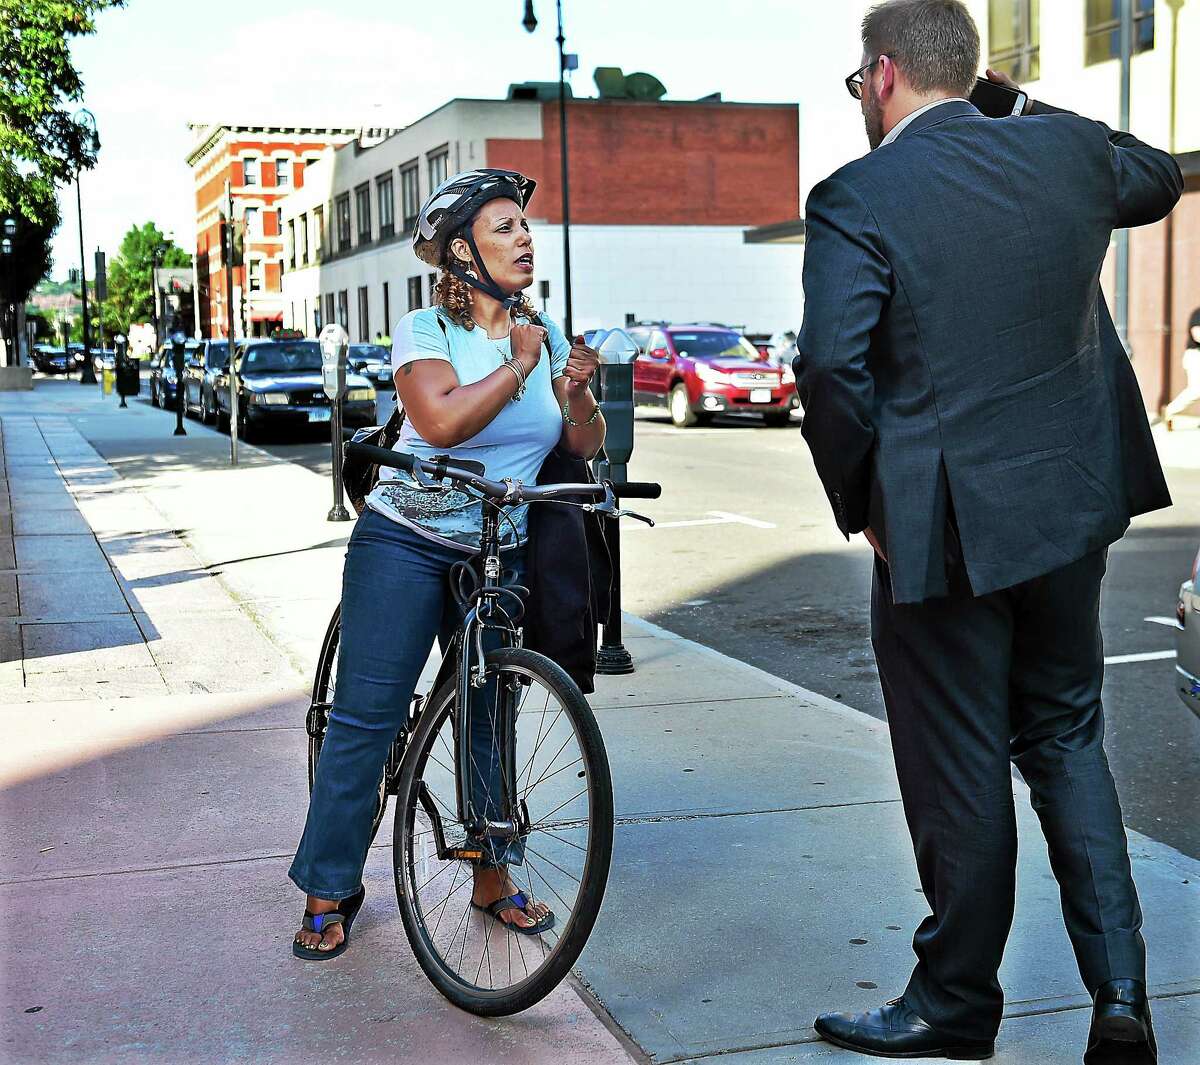 Doug Hausladen, the Director of Transportation, Traffic & Parking talks to a bicyclist who still prefers sidewalks over the bike path in New Haven, Wednesday August 26, 2015.